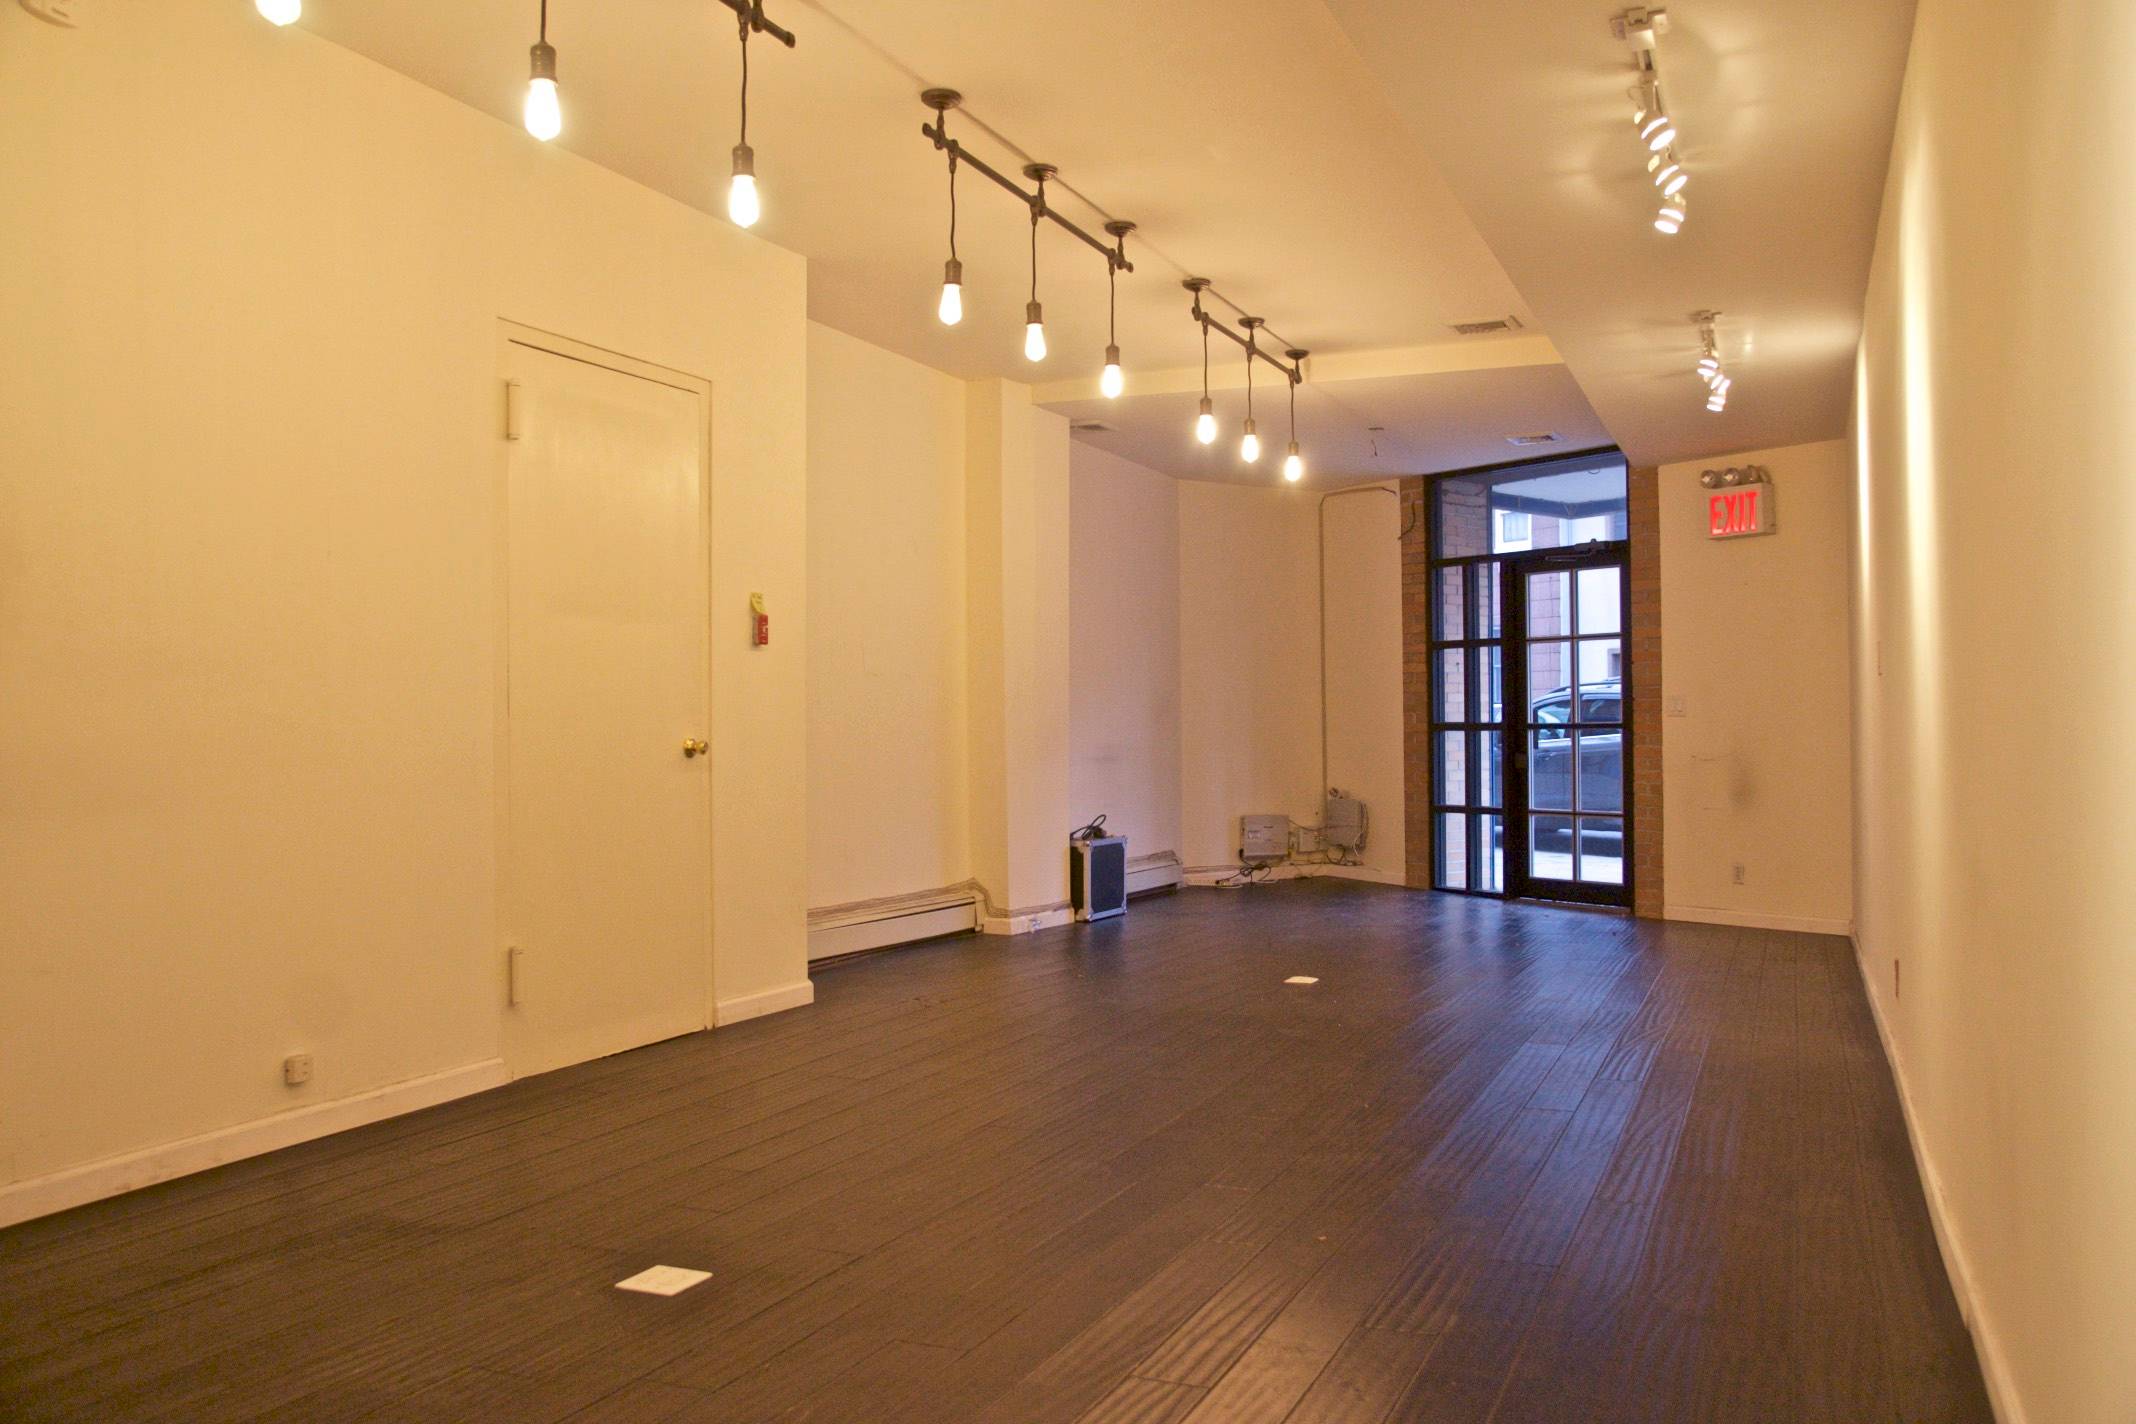 Ground Floor Retail/Office Space Available in Greenpoint/Williamsburg W/High LOFT-Like Ceilings